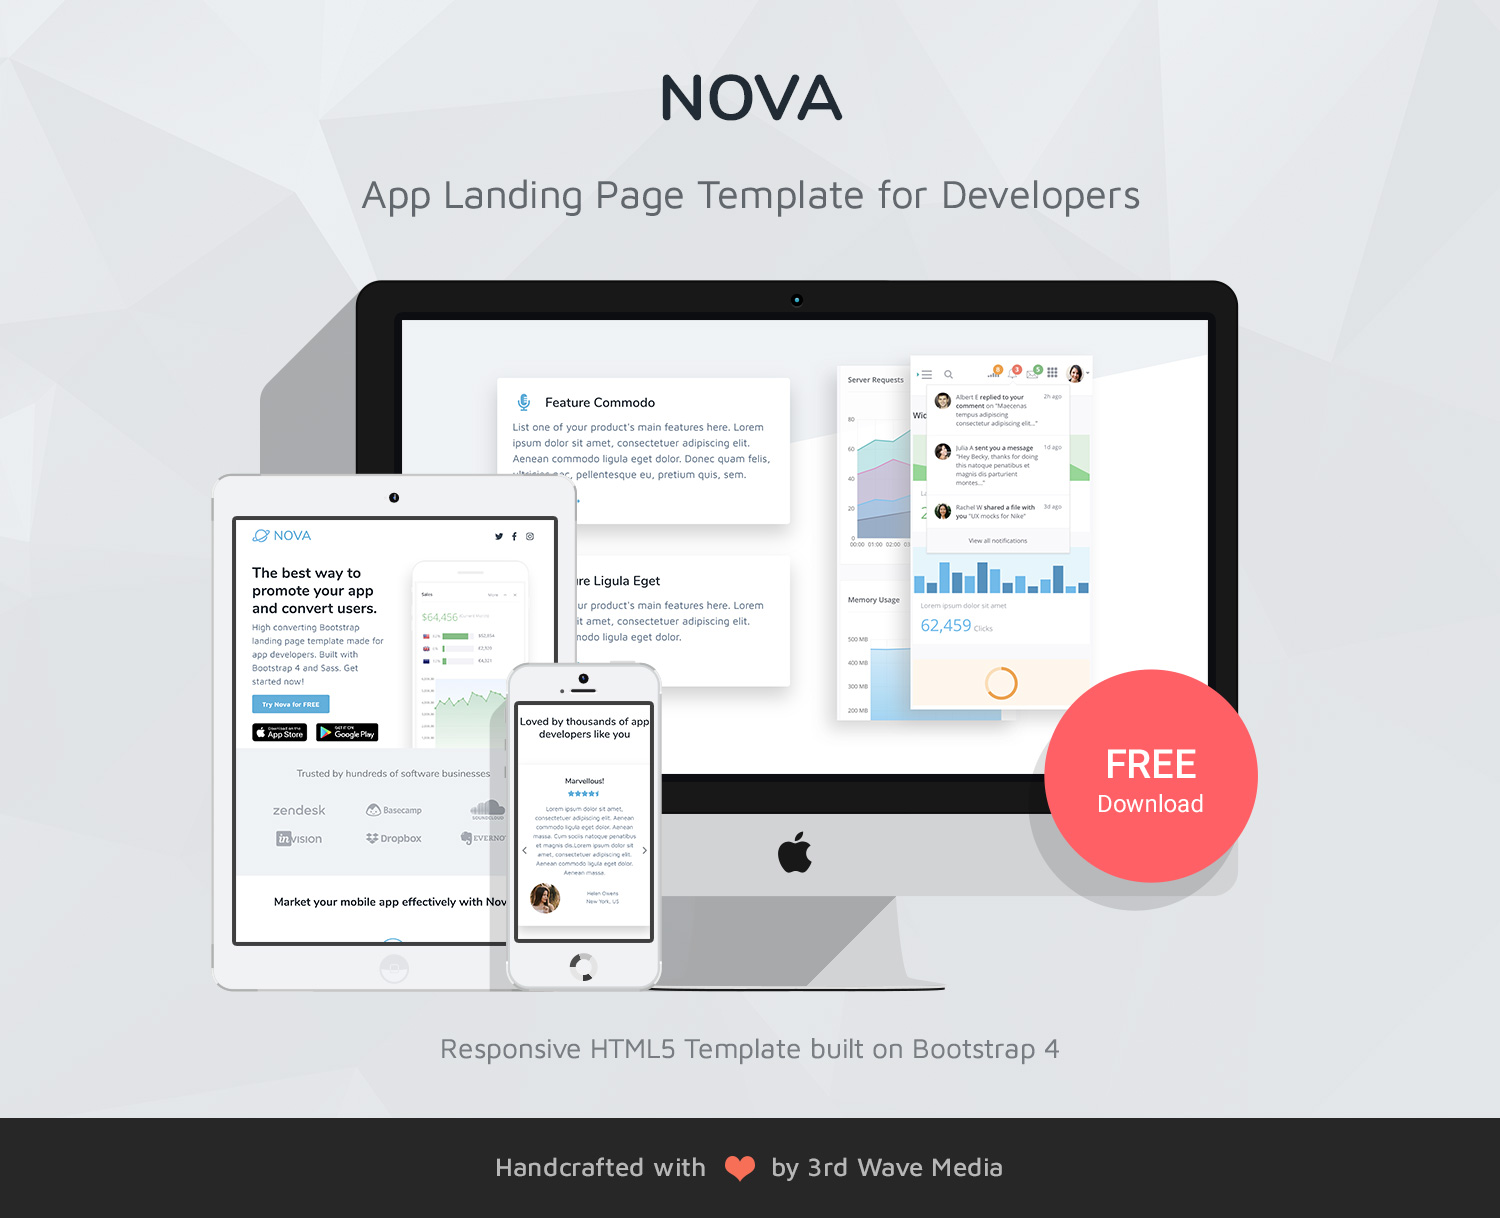 Nova - Free Bootstrap 4 App Landing Page Template for Developers